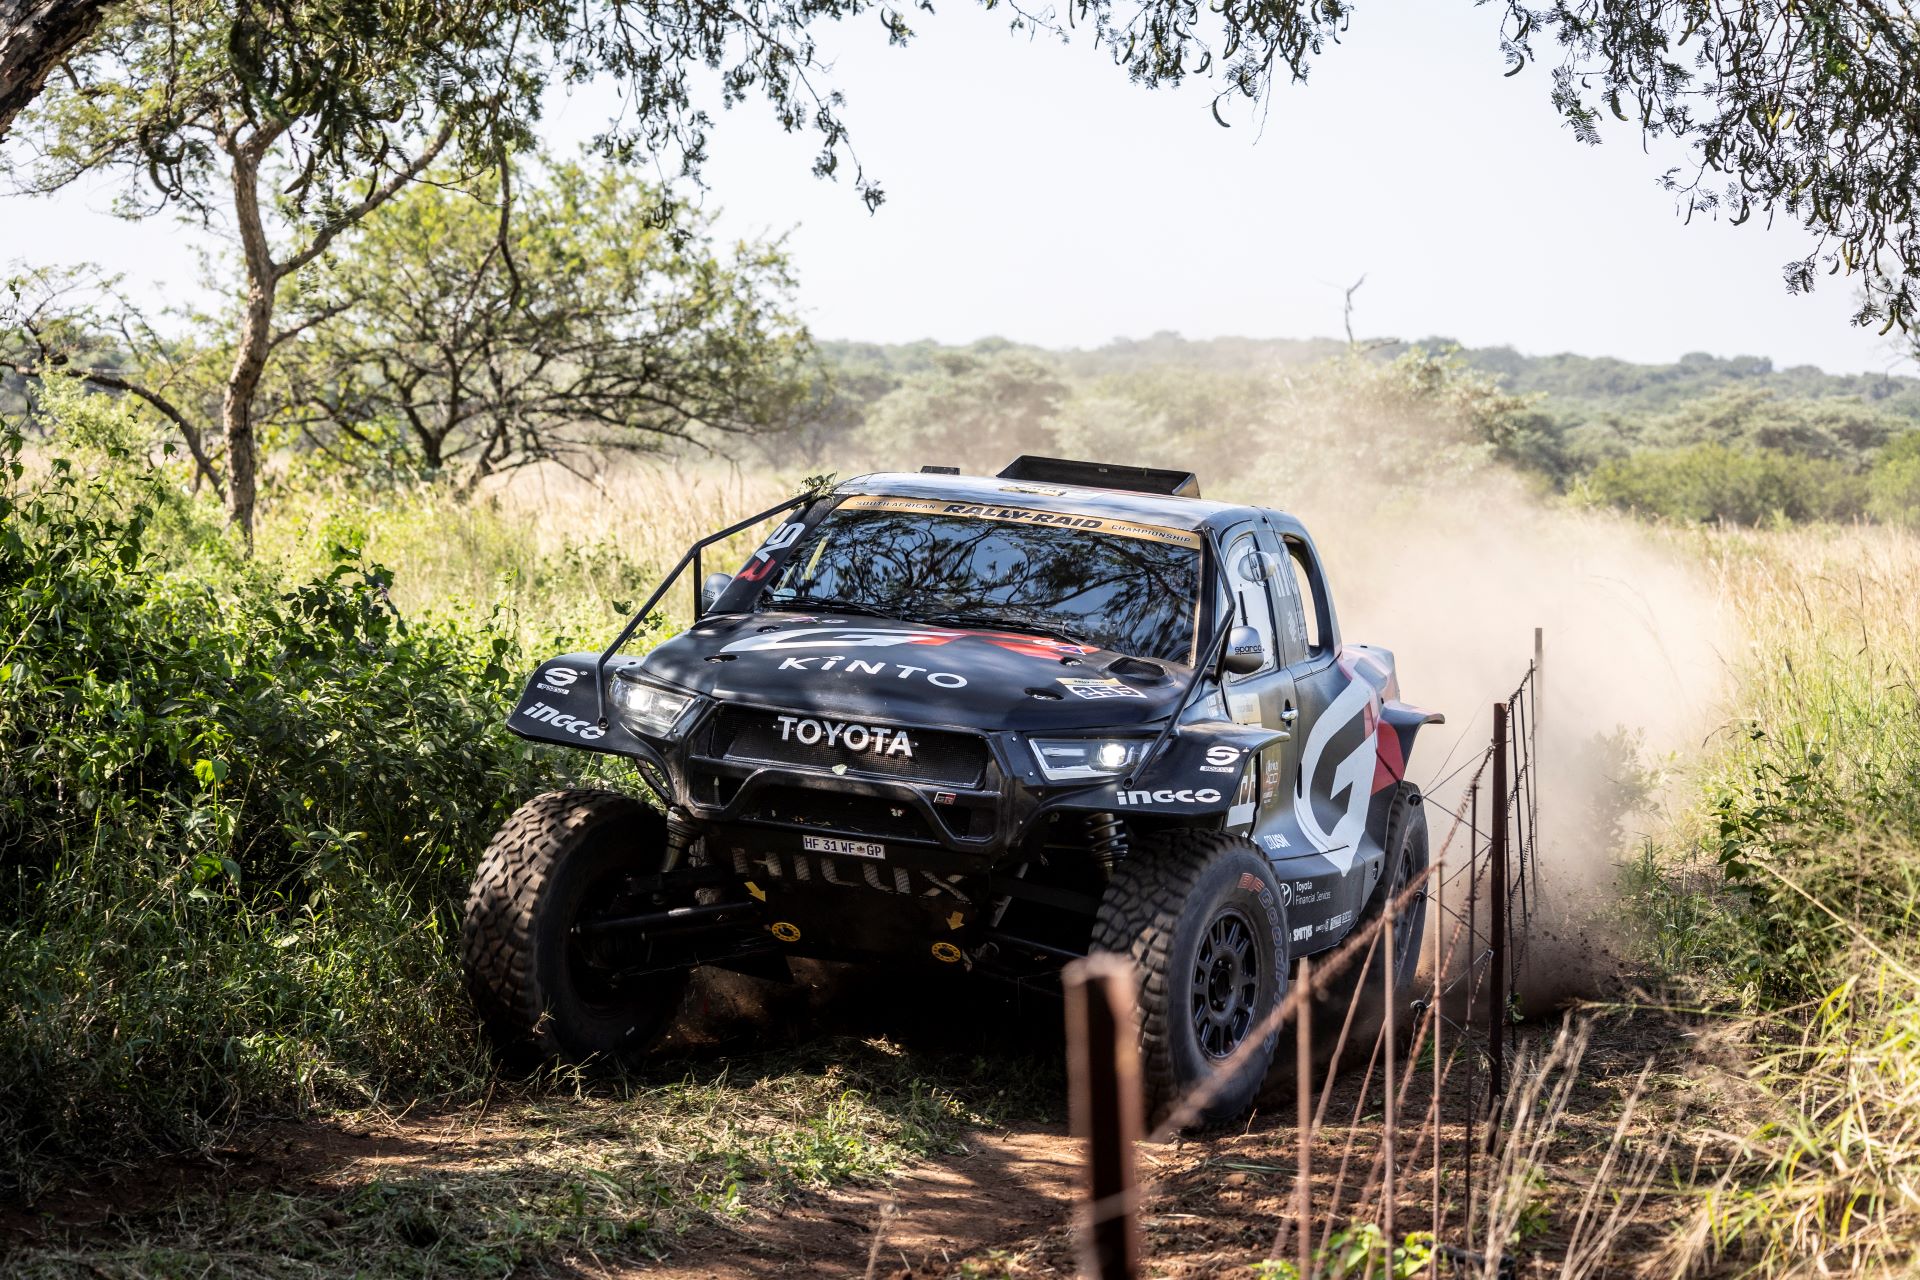 Toyota Gazoo Racing Dominates with Top Two Finishes at South African Rally-Raid Opener